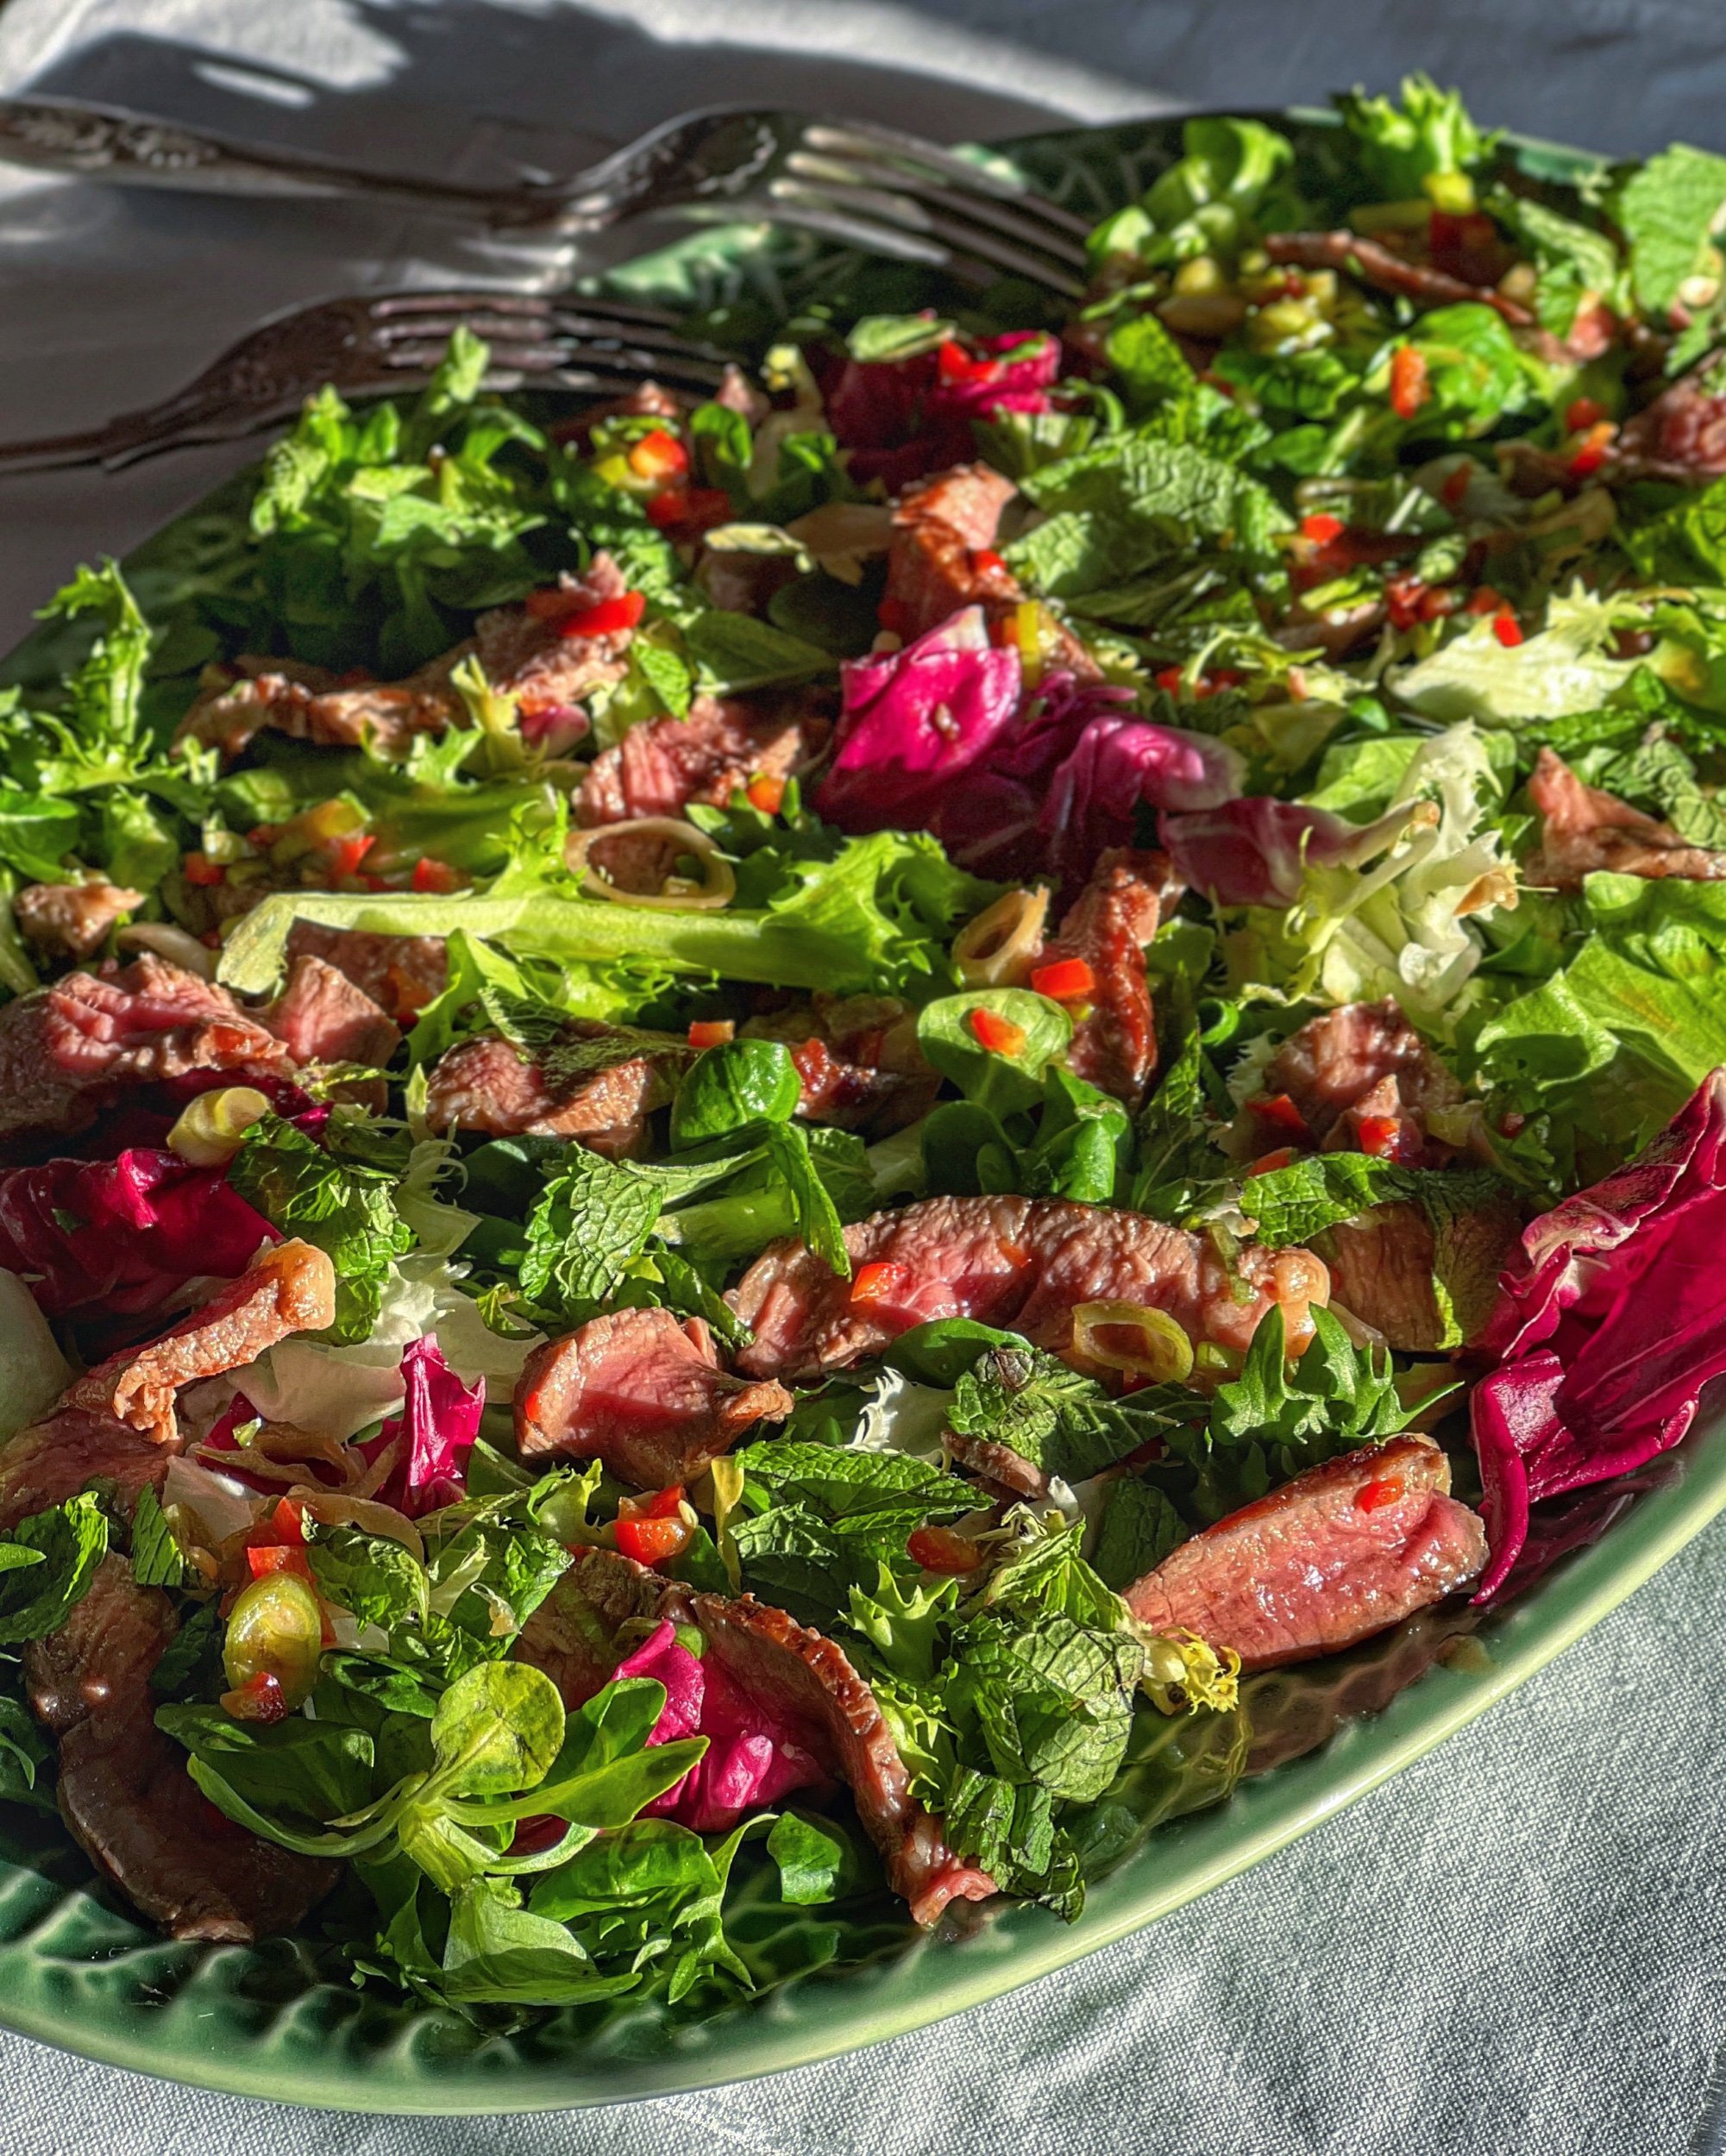 Nigella's Hot and Sour Beef Salad